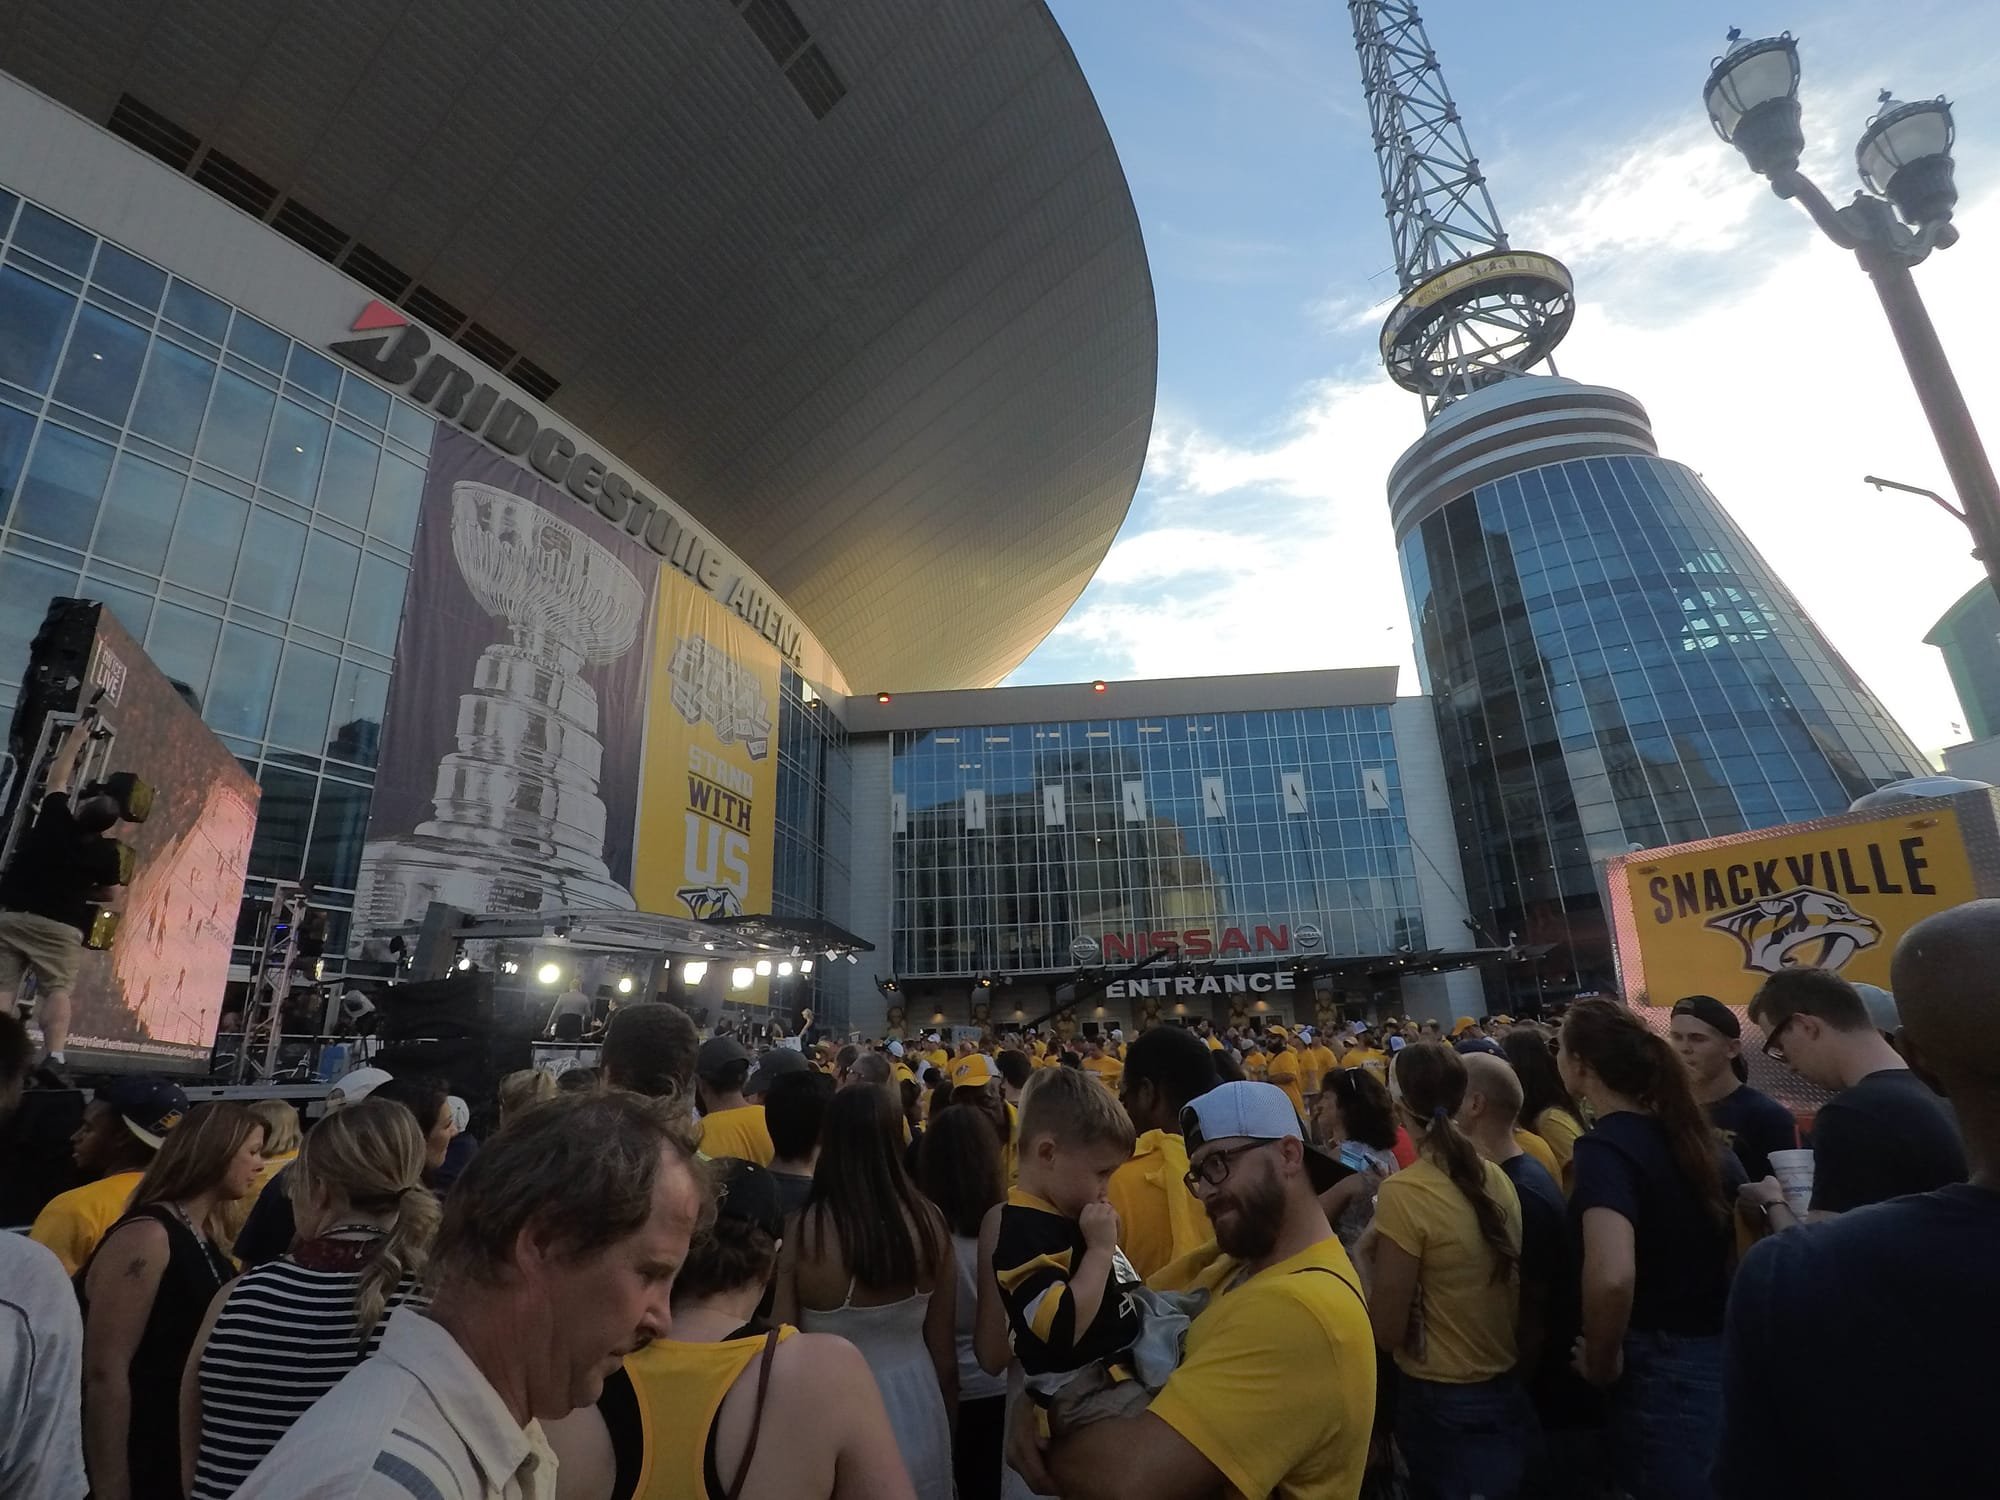 Bridgestone Arena for game 6 of the Stanley Cup Finals!